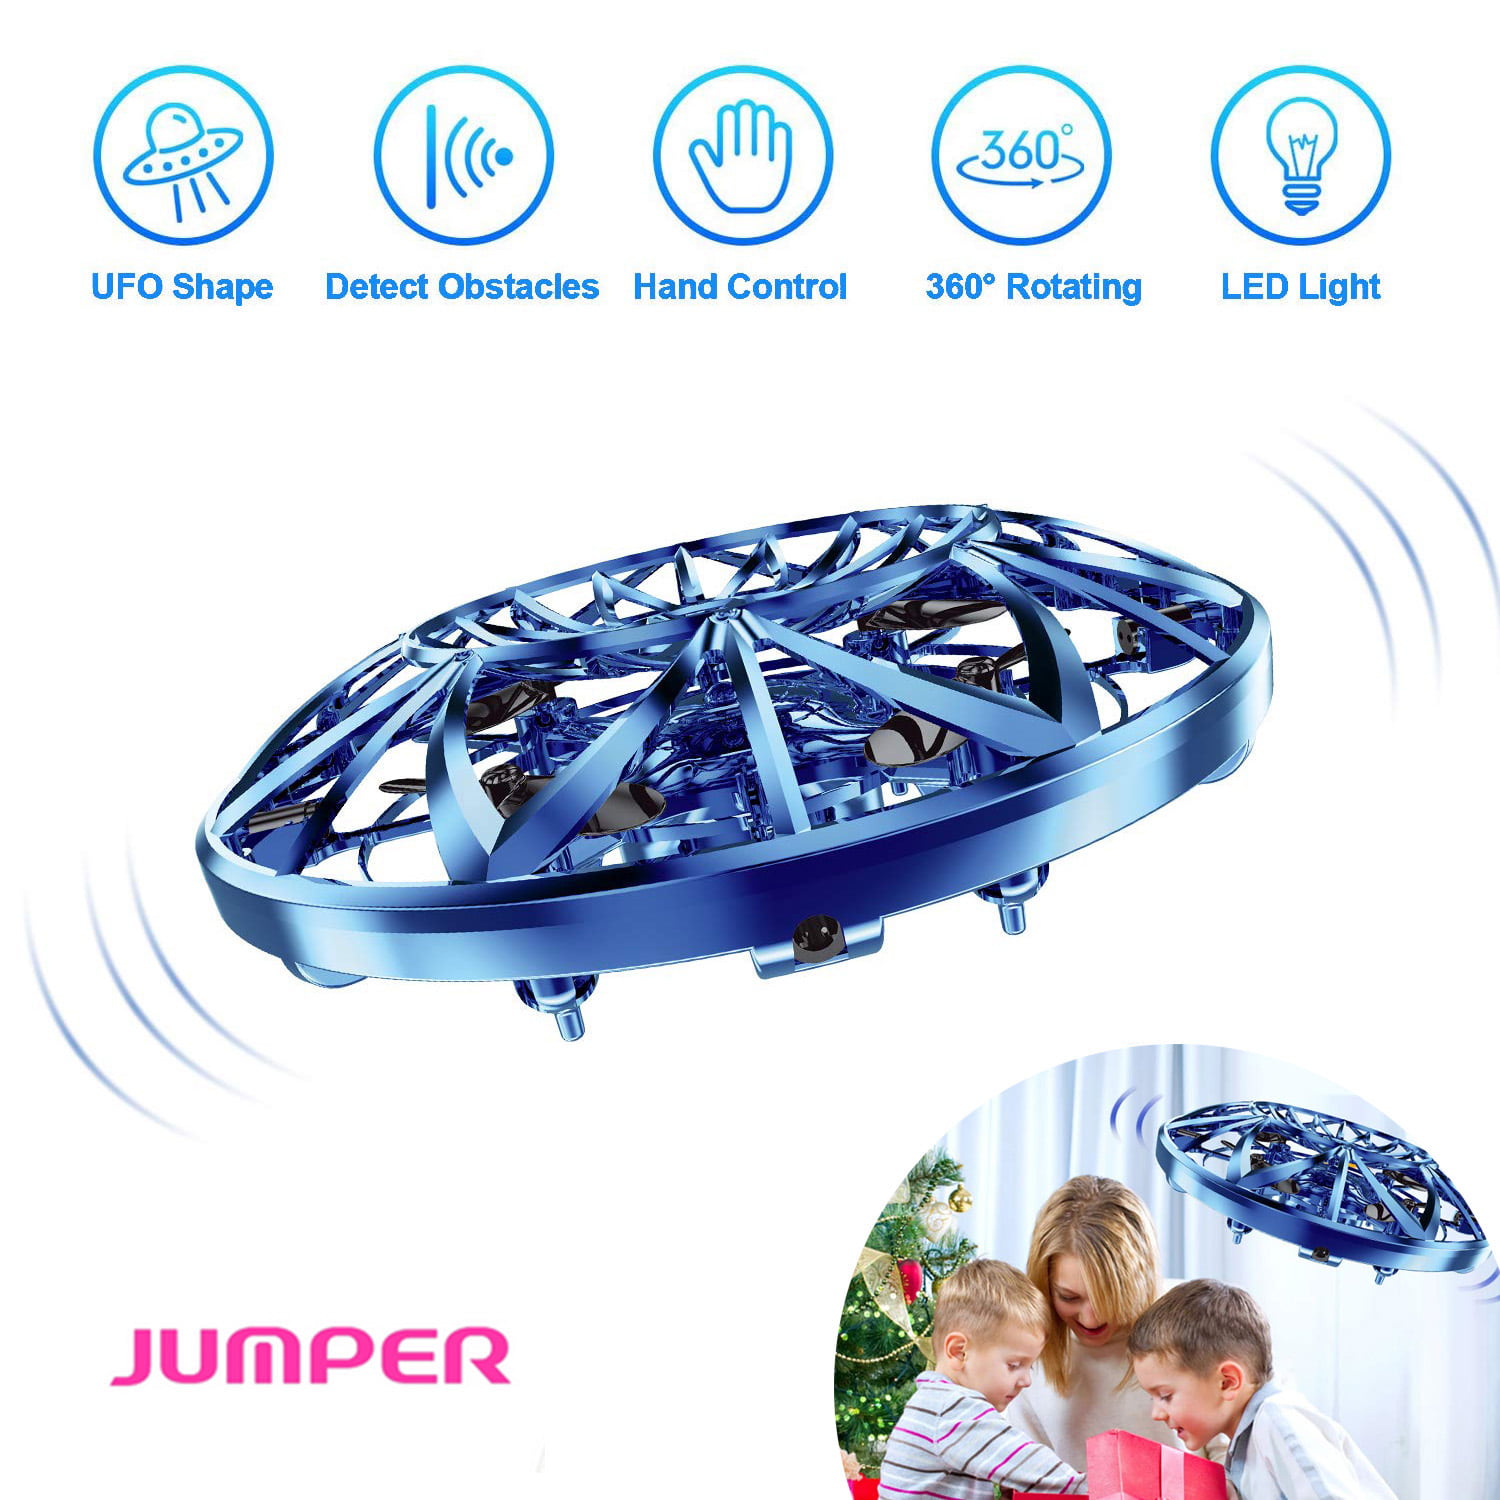 Kids' Hand-Operated Flying Drone Toy